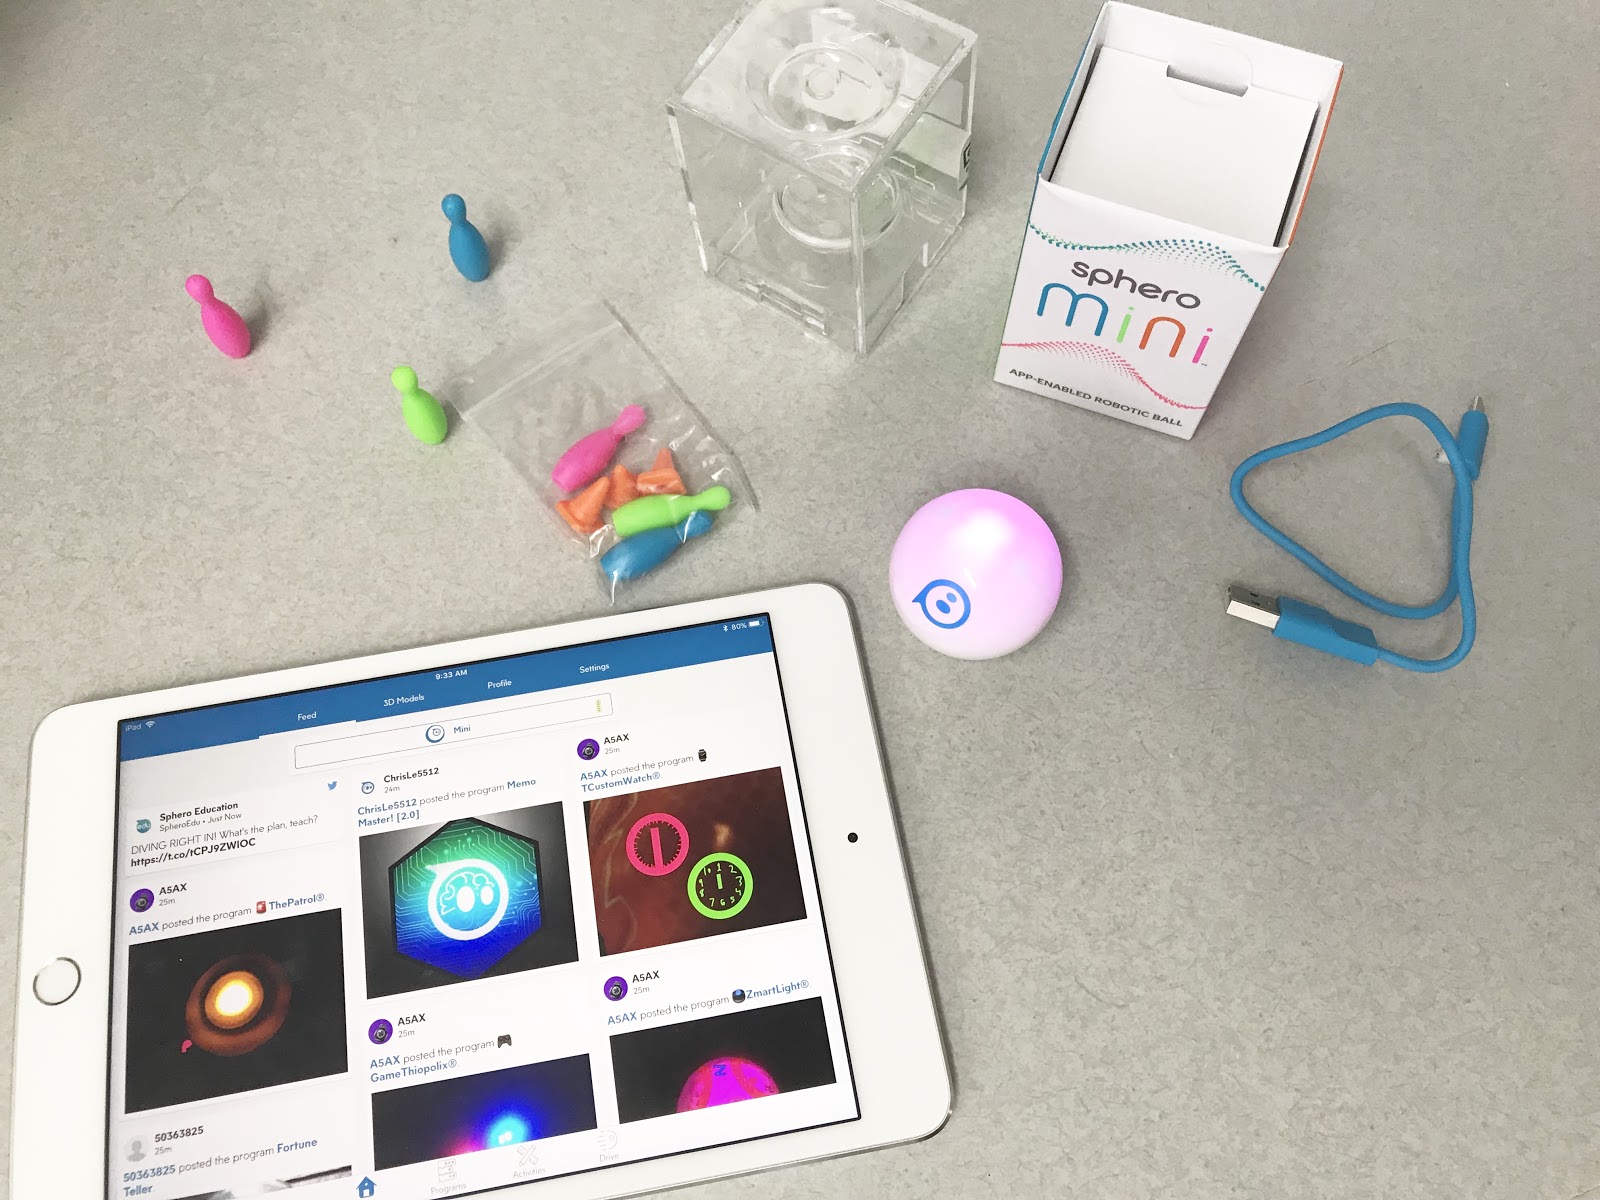 the sphero mini robot and accessories with an ipad